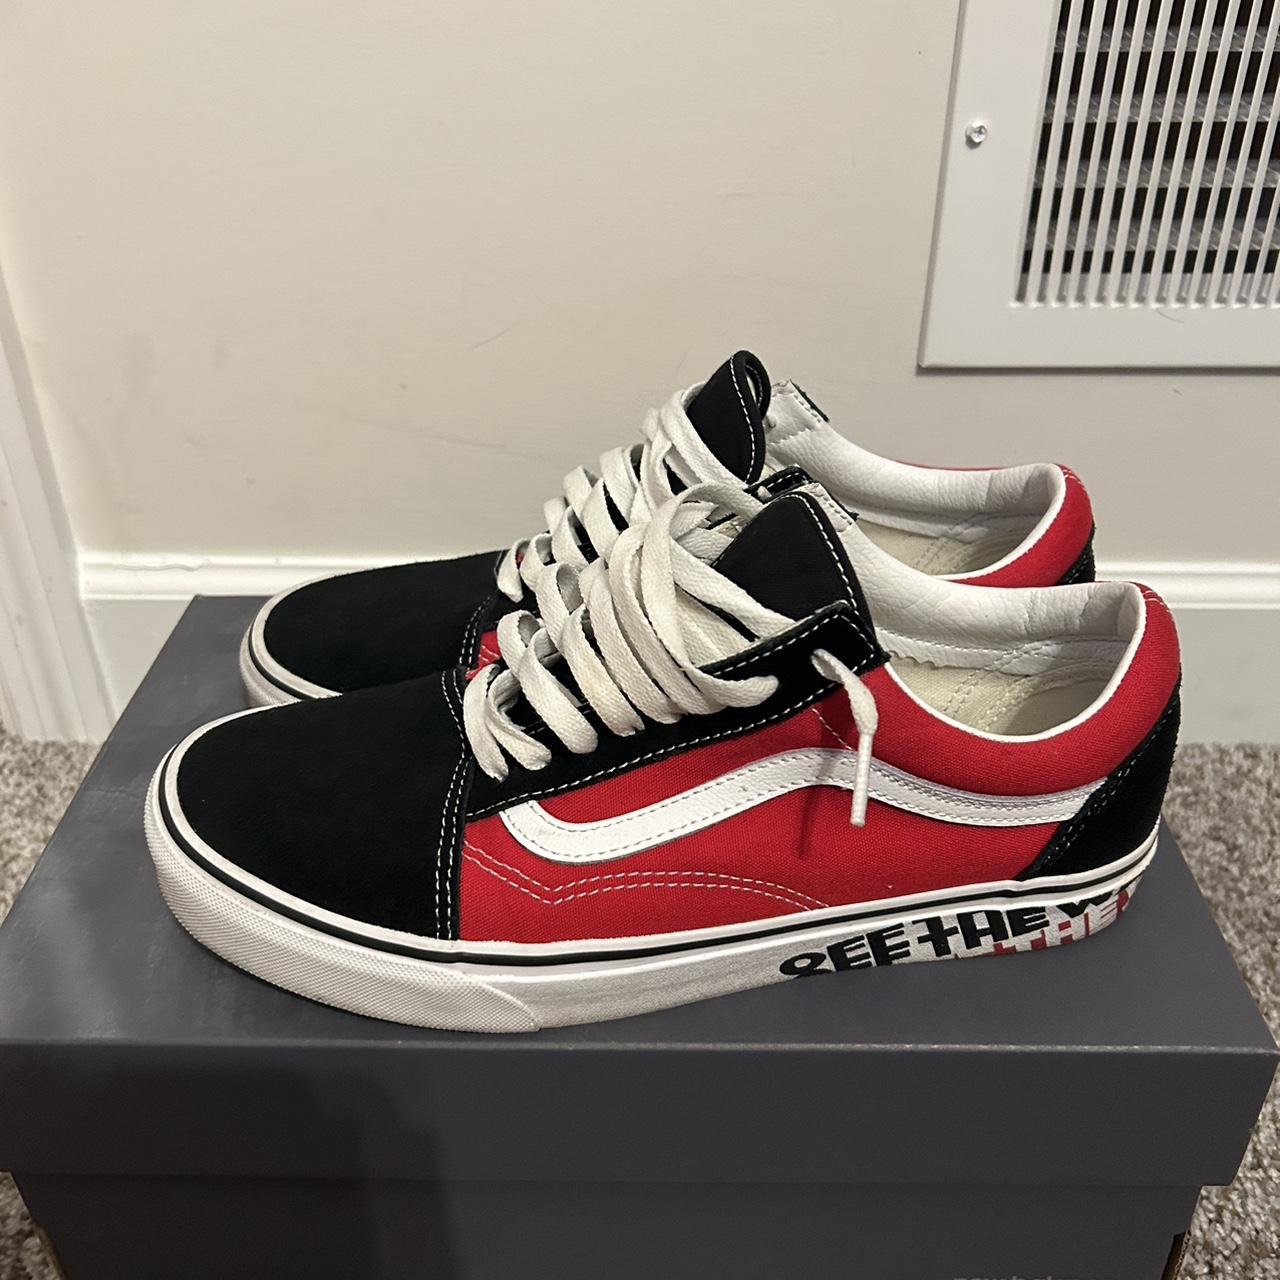 Vans Men's Red and Black Trainers (3)